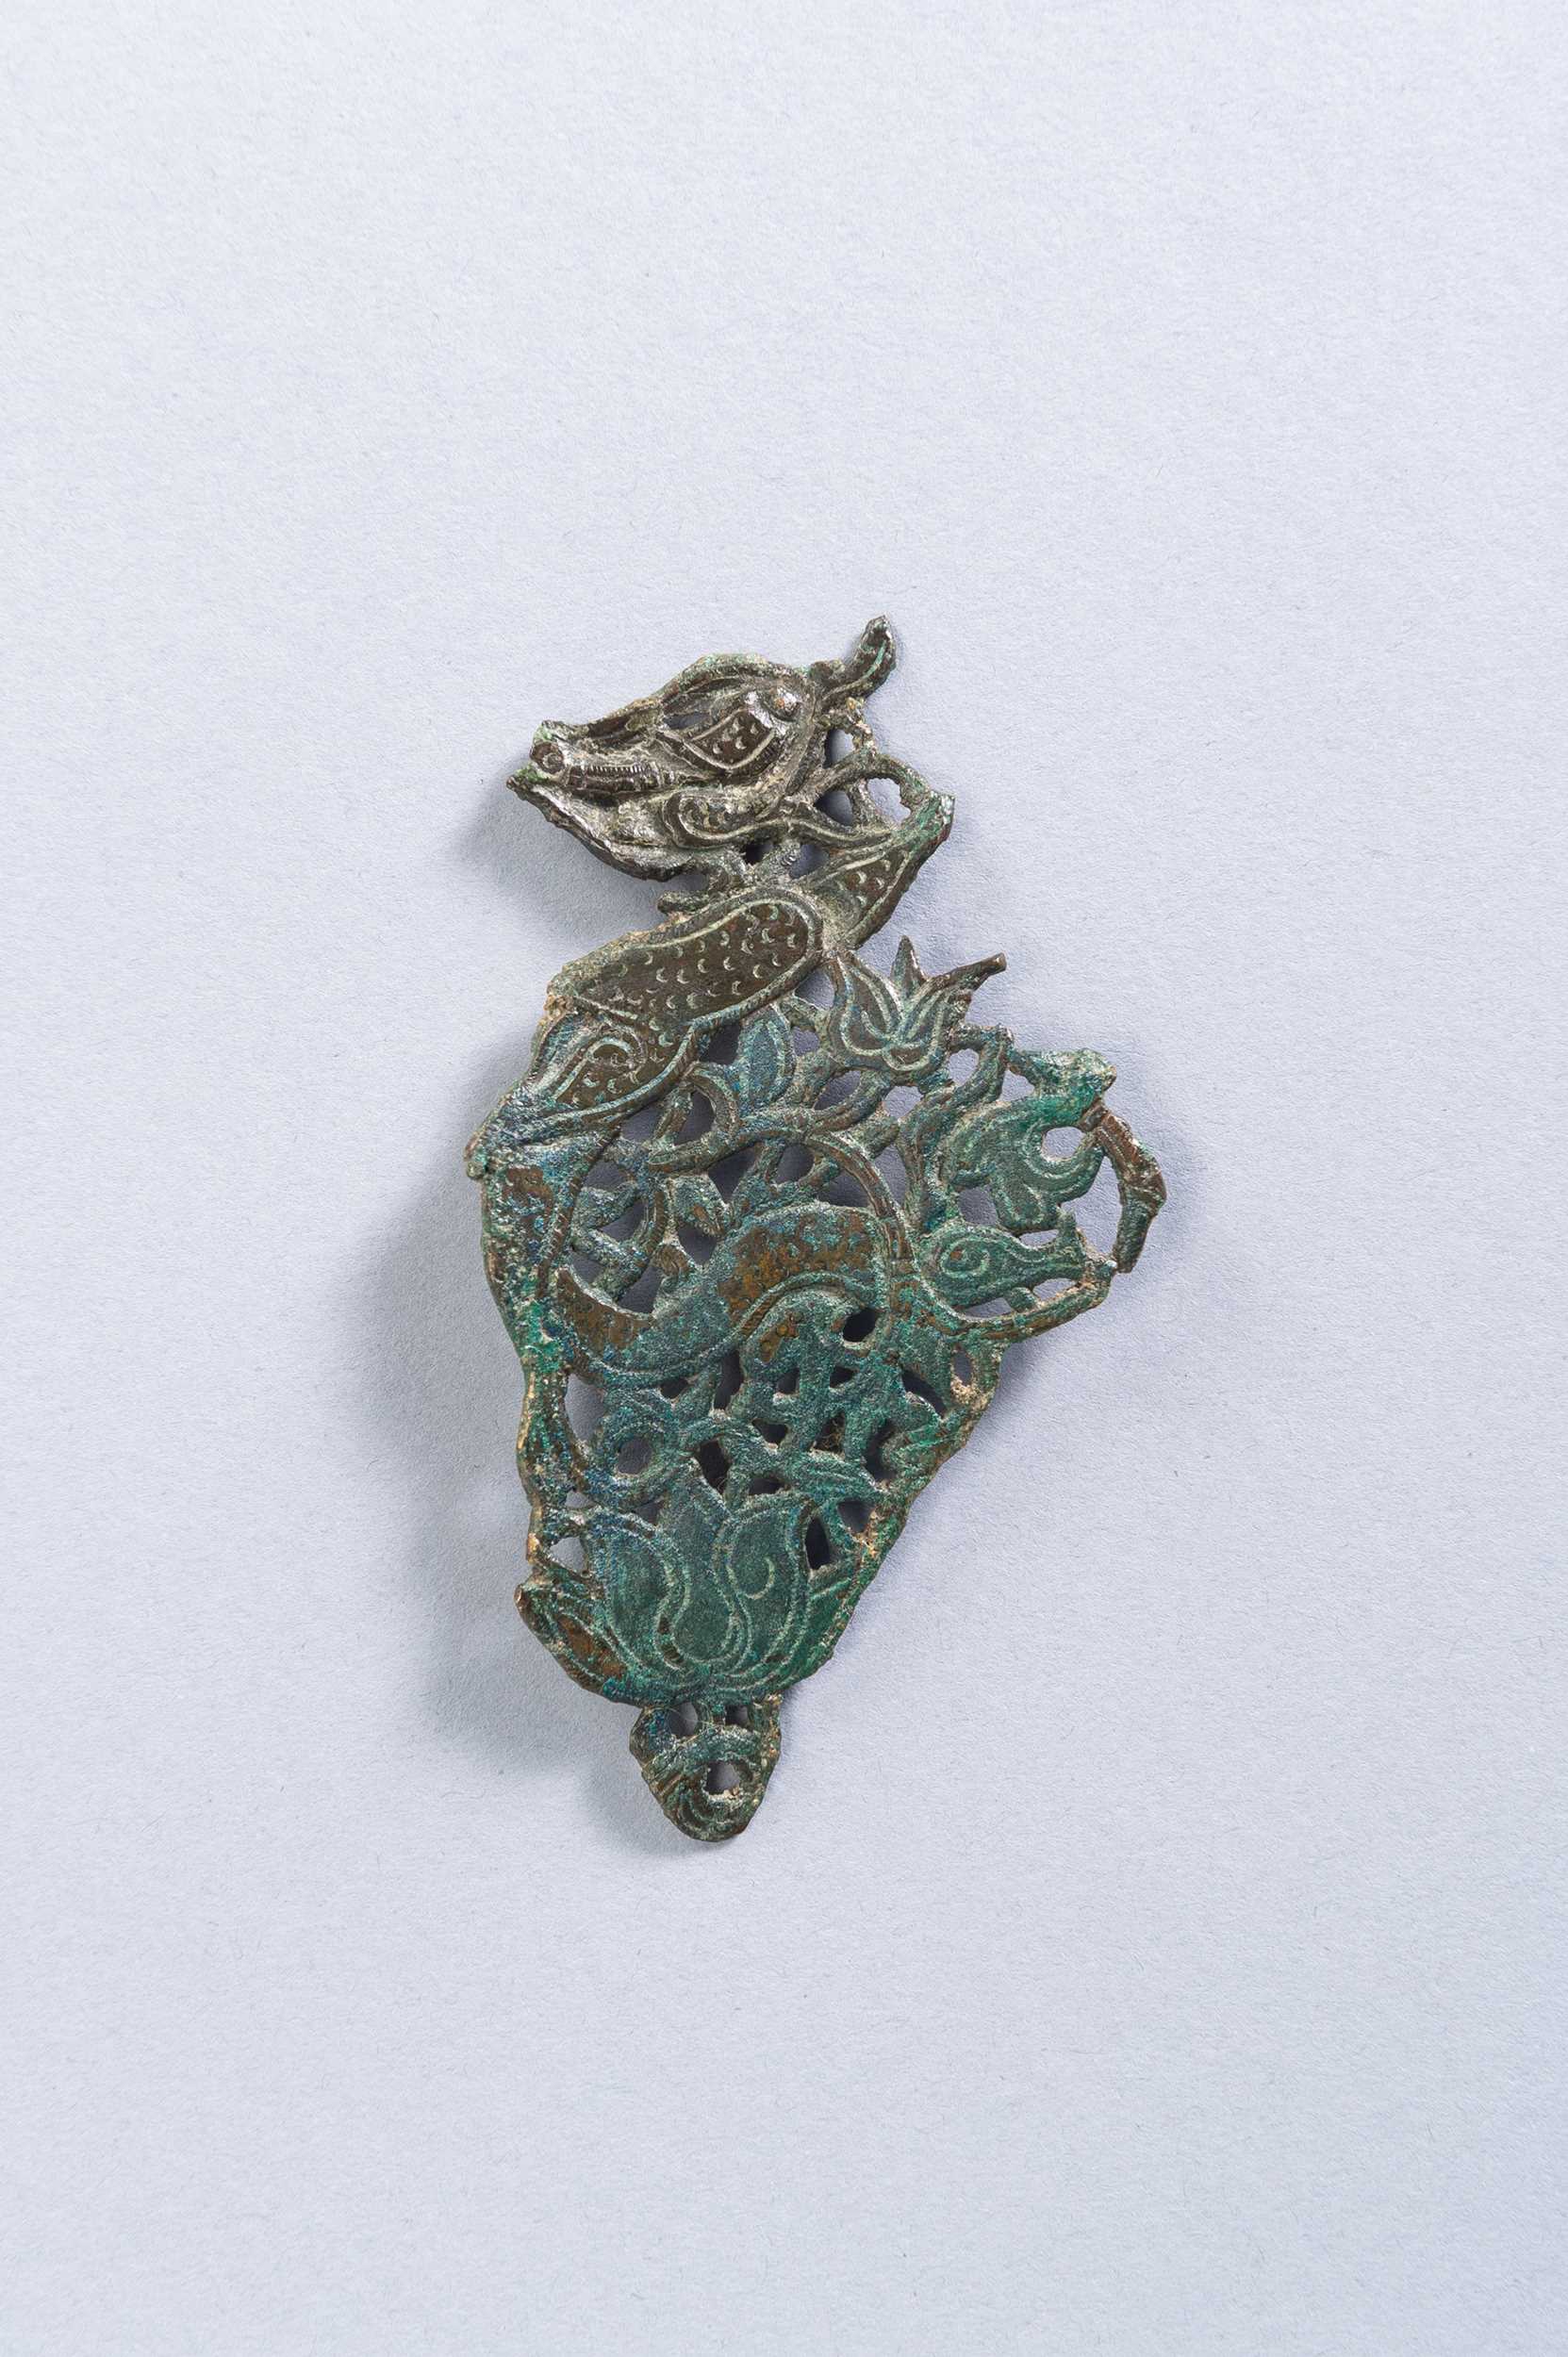 Lot 5 - A CHINESE BRONZE ORNAMENT, TANG TO LIAO